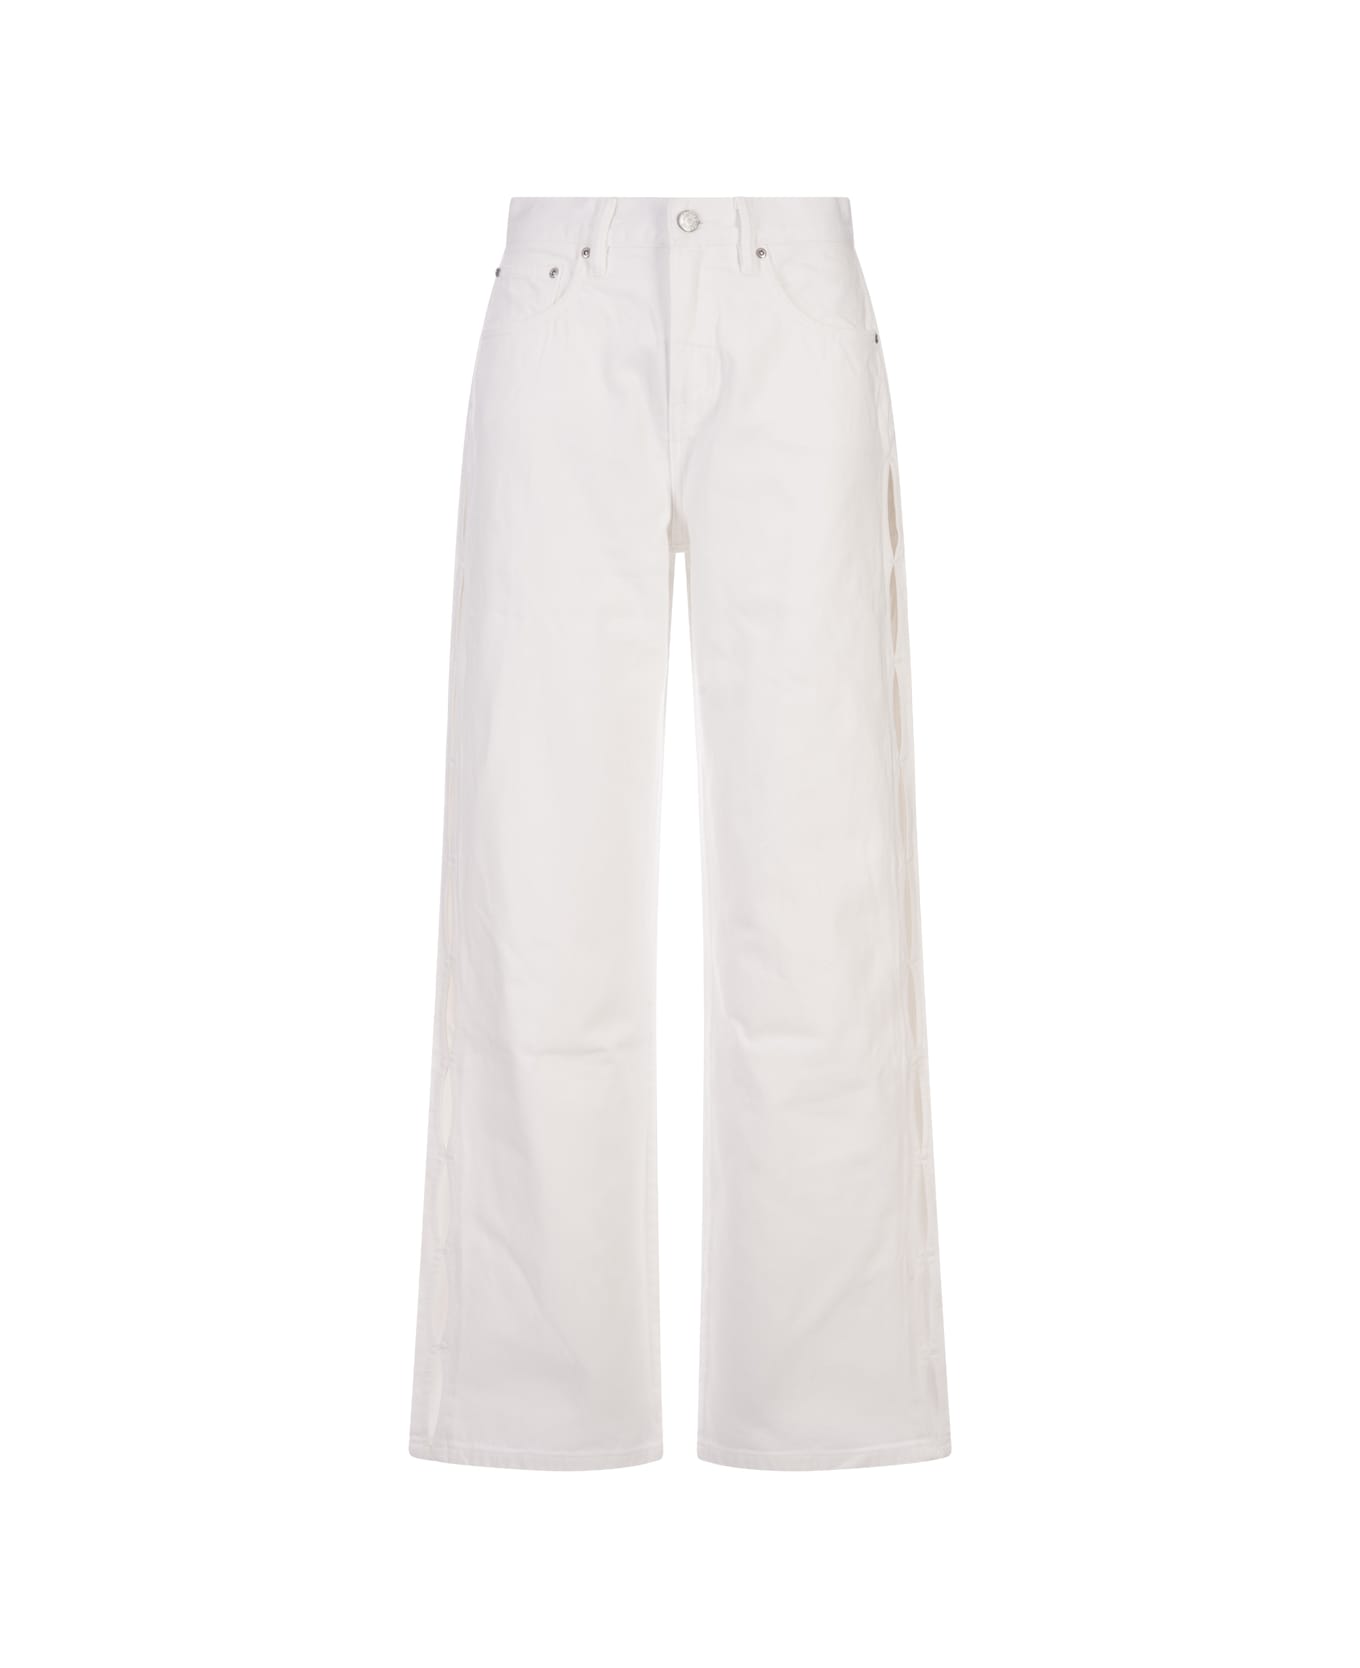 Purple Brand Wide Side Cut Out Jeans In White - White